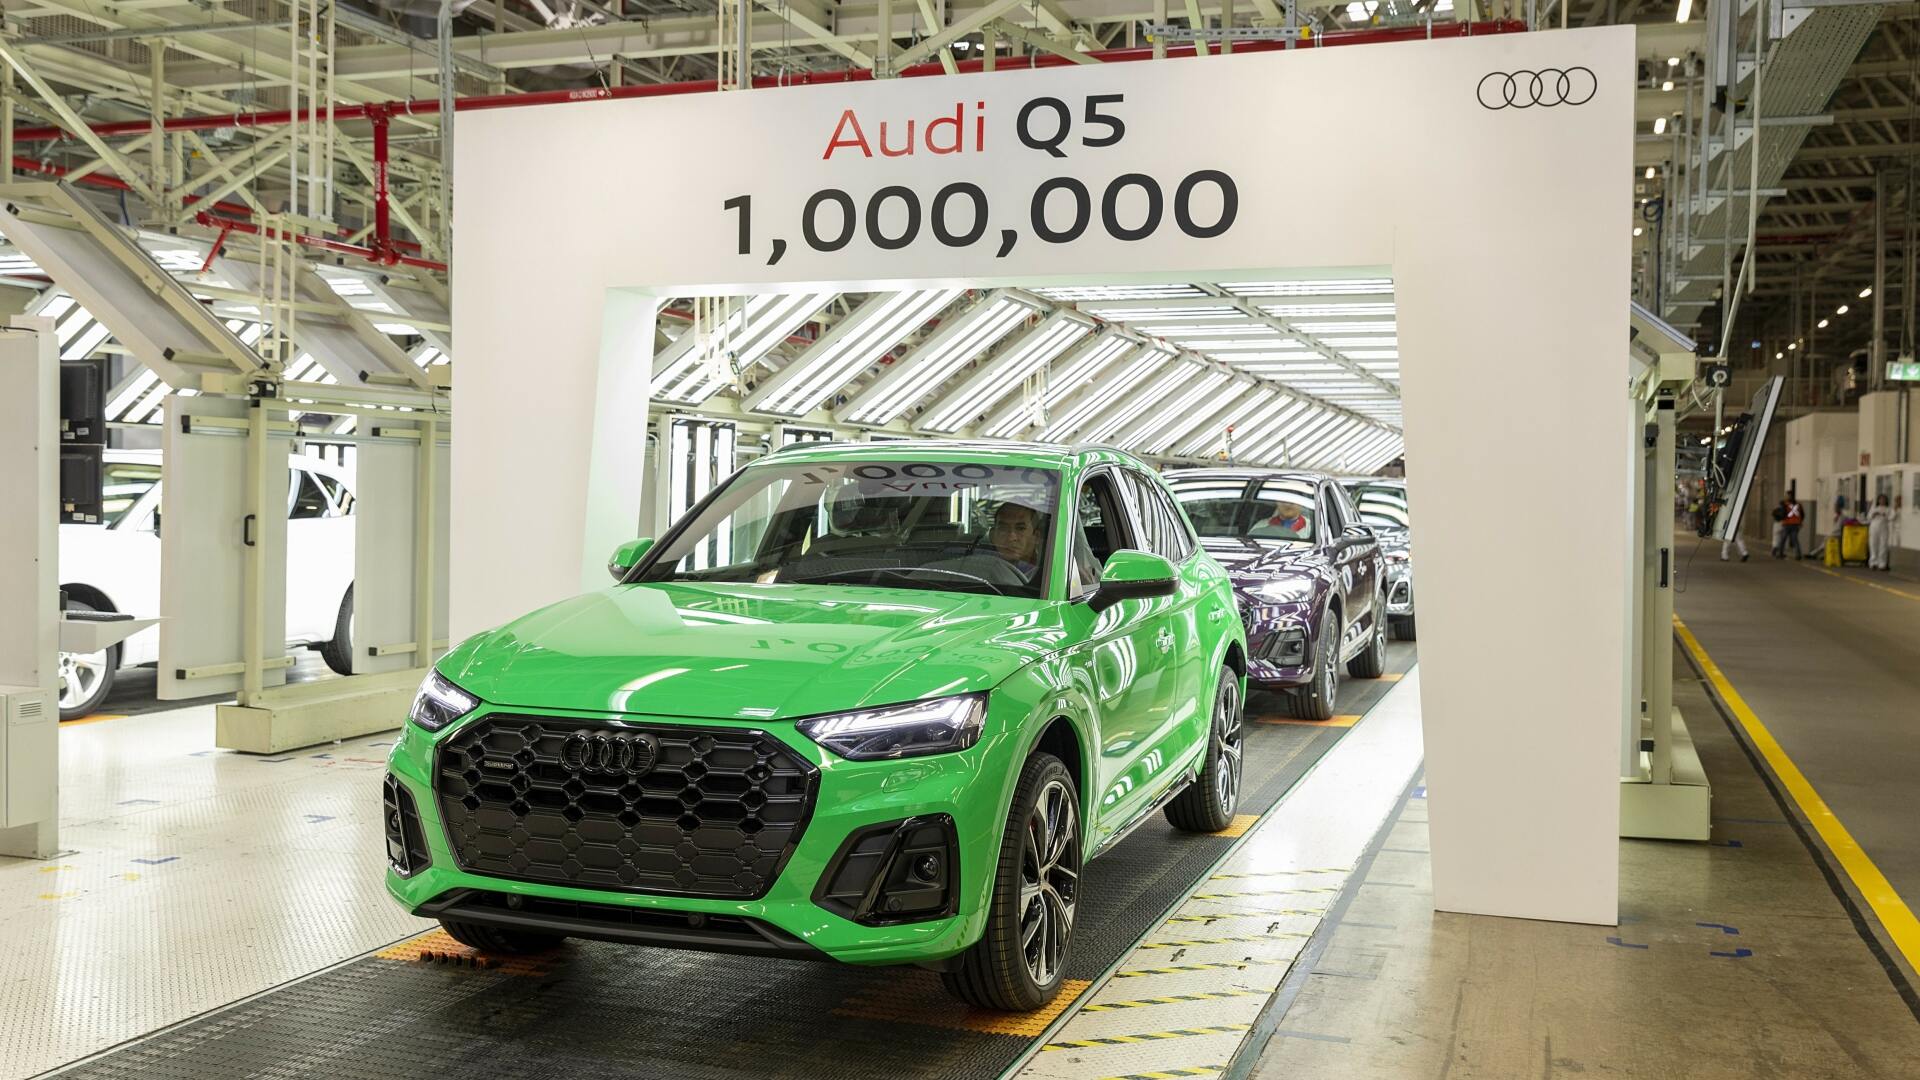 The One-Millionth Q5 Rolling off The Assembly Line (Credits Audi Media Center)